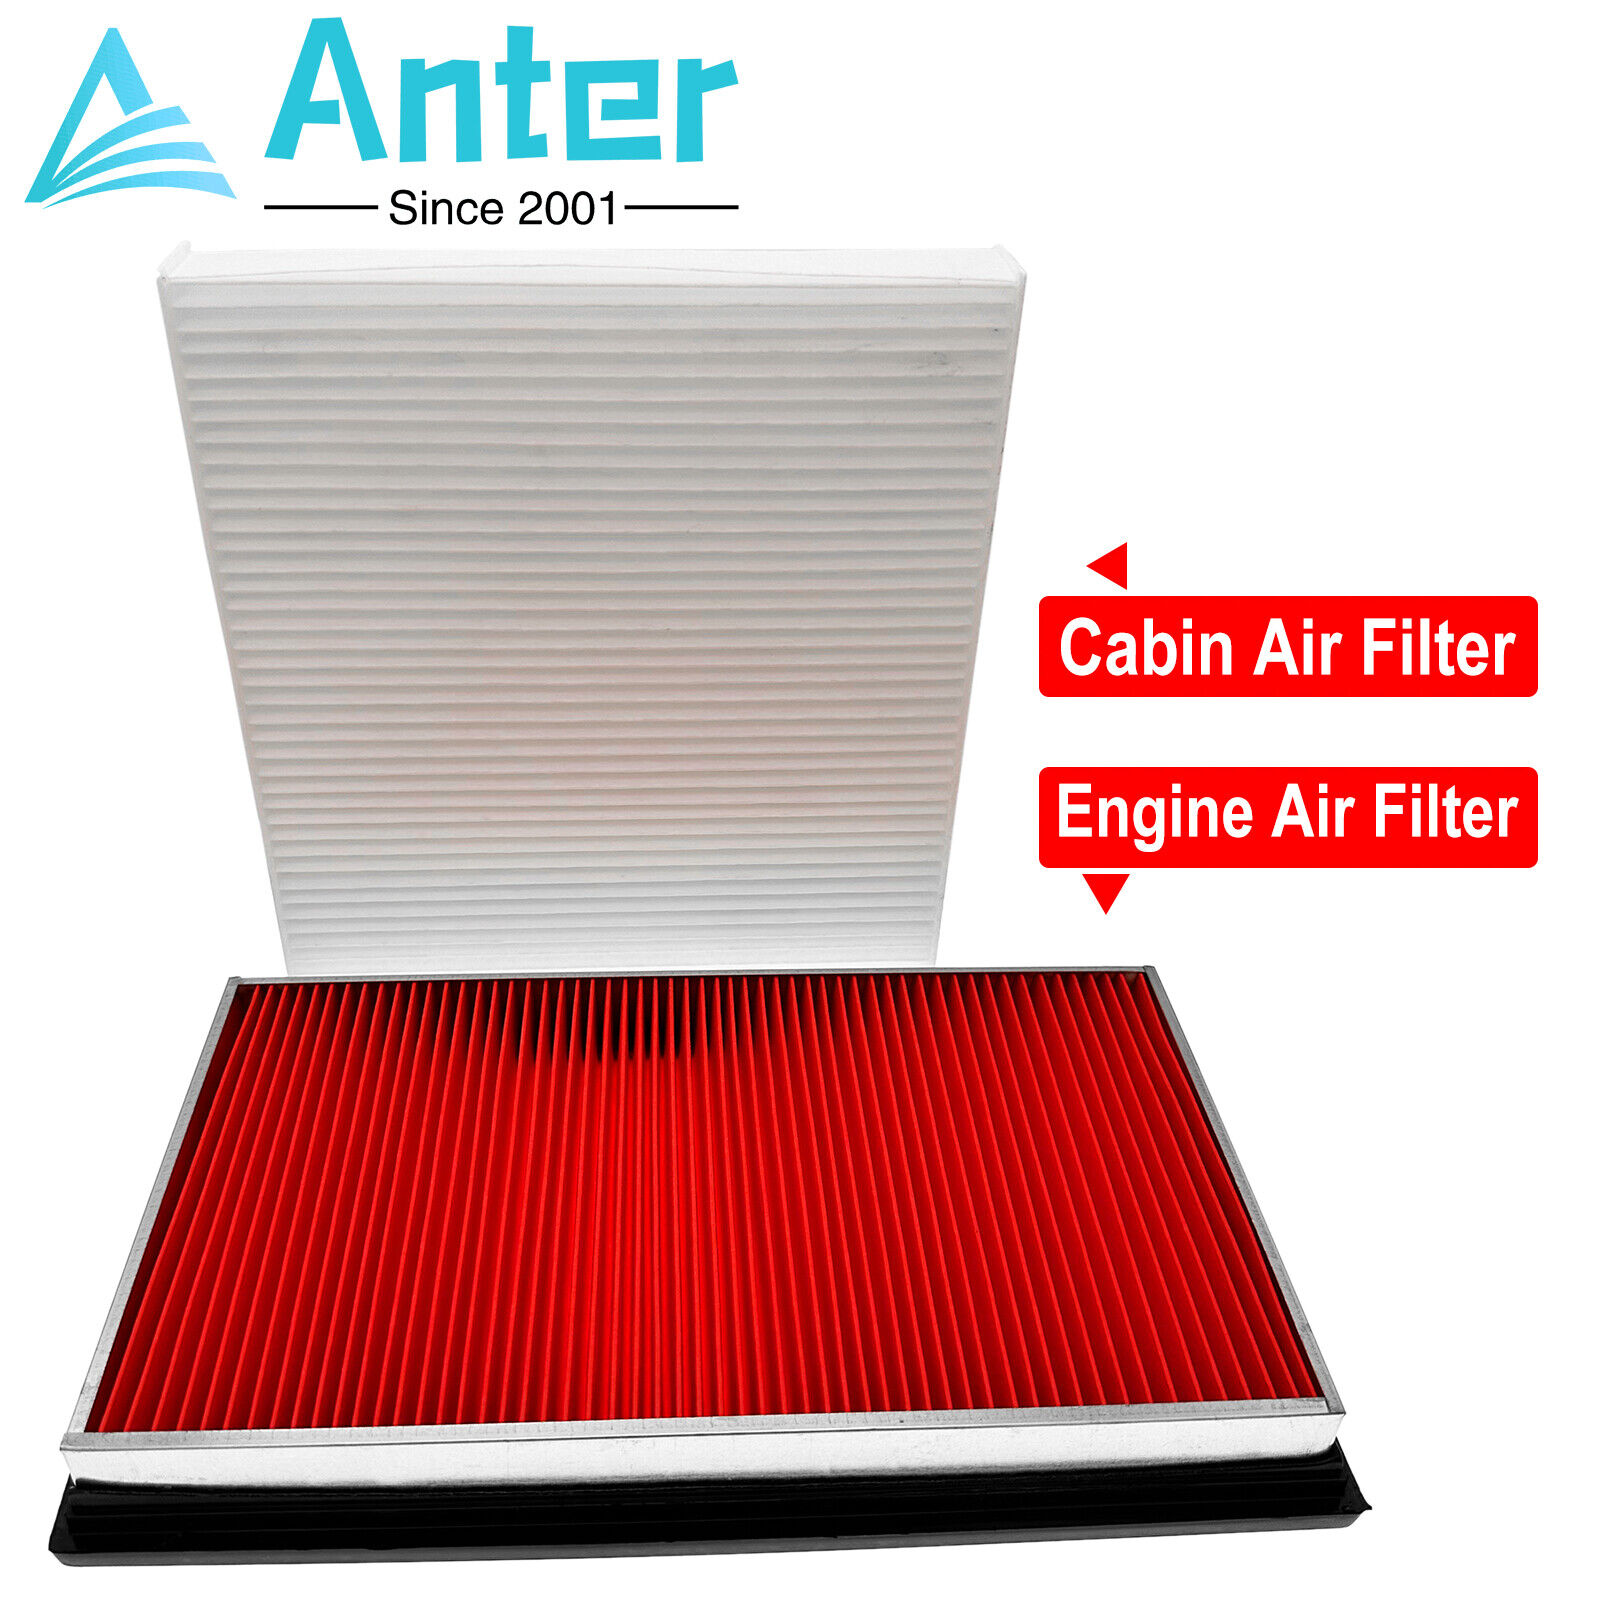 Cabin & Engine Air Filter For Nissan Altima Maxima Murano Quest Pathfinder 3.5L